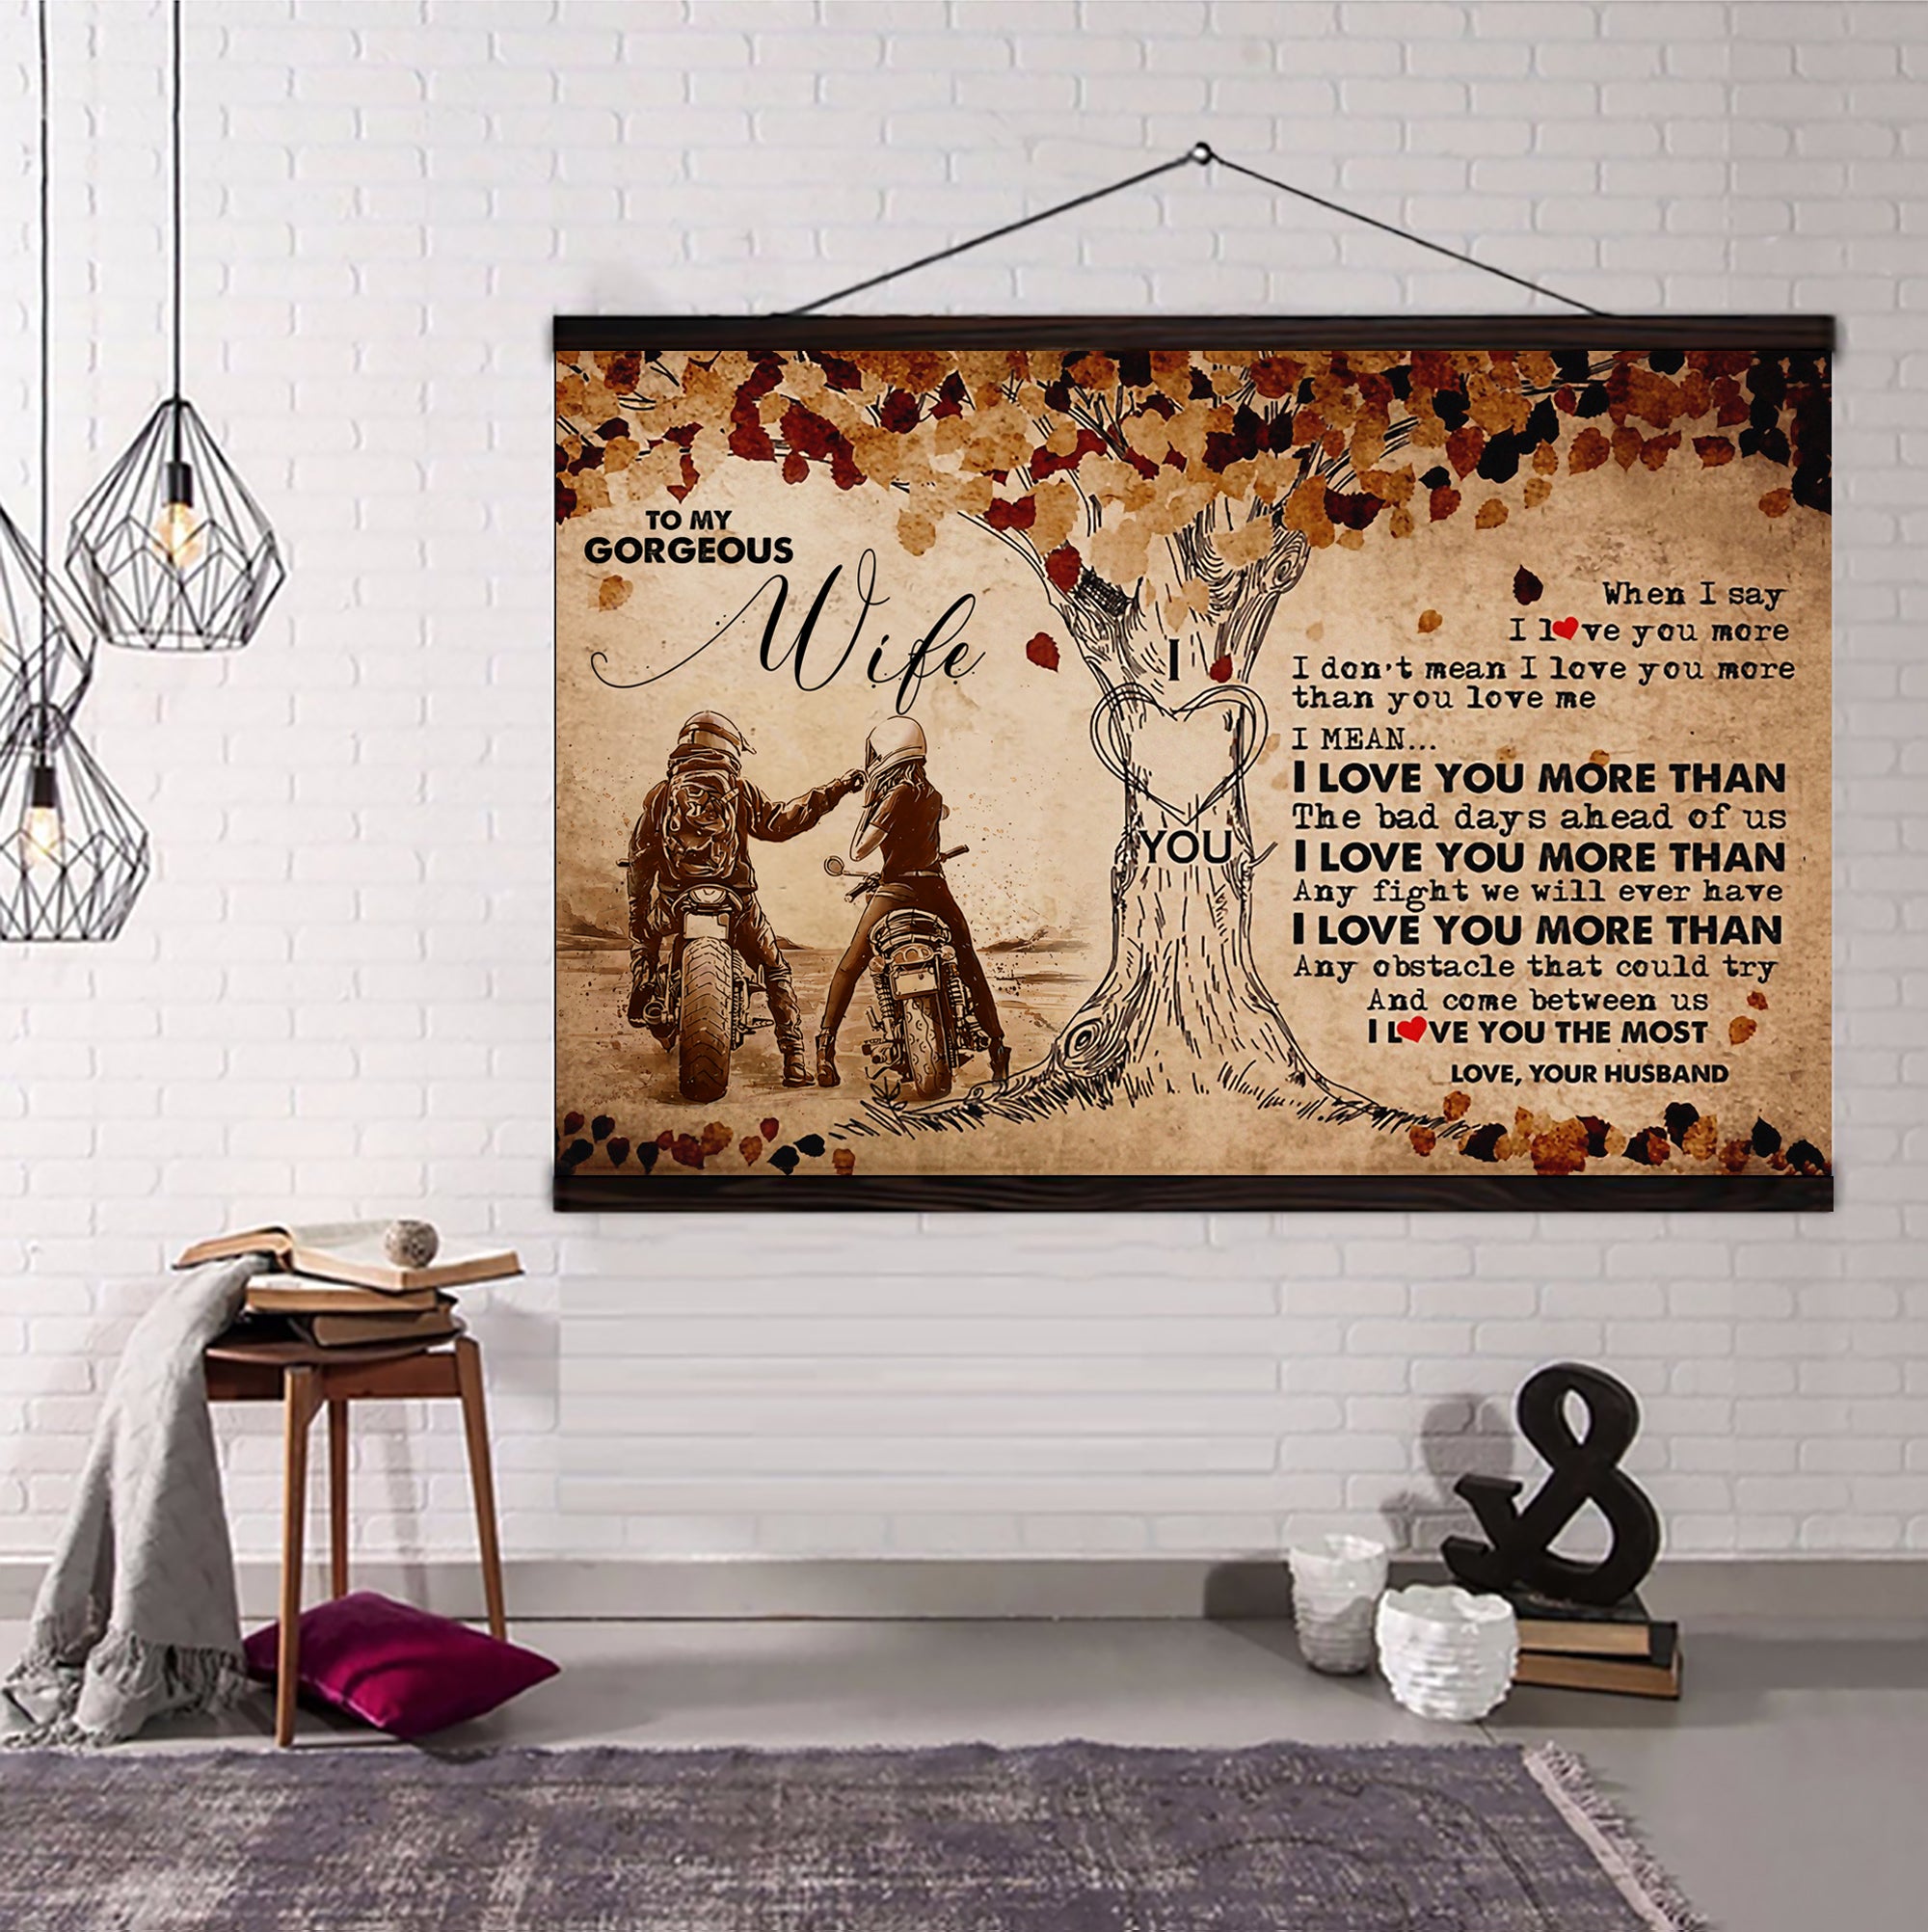 CUSTOMIZABLE SAMURAI, VK CANVAS POSTER WHEN I SAY I LOVE YOU MORE, I LOVE YOU THE MOST